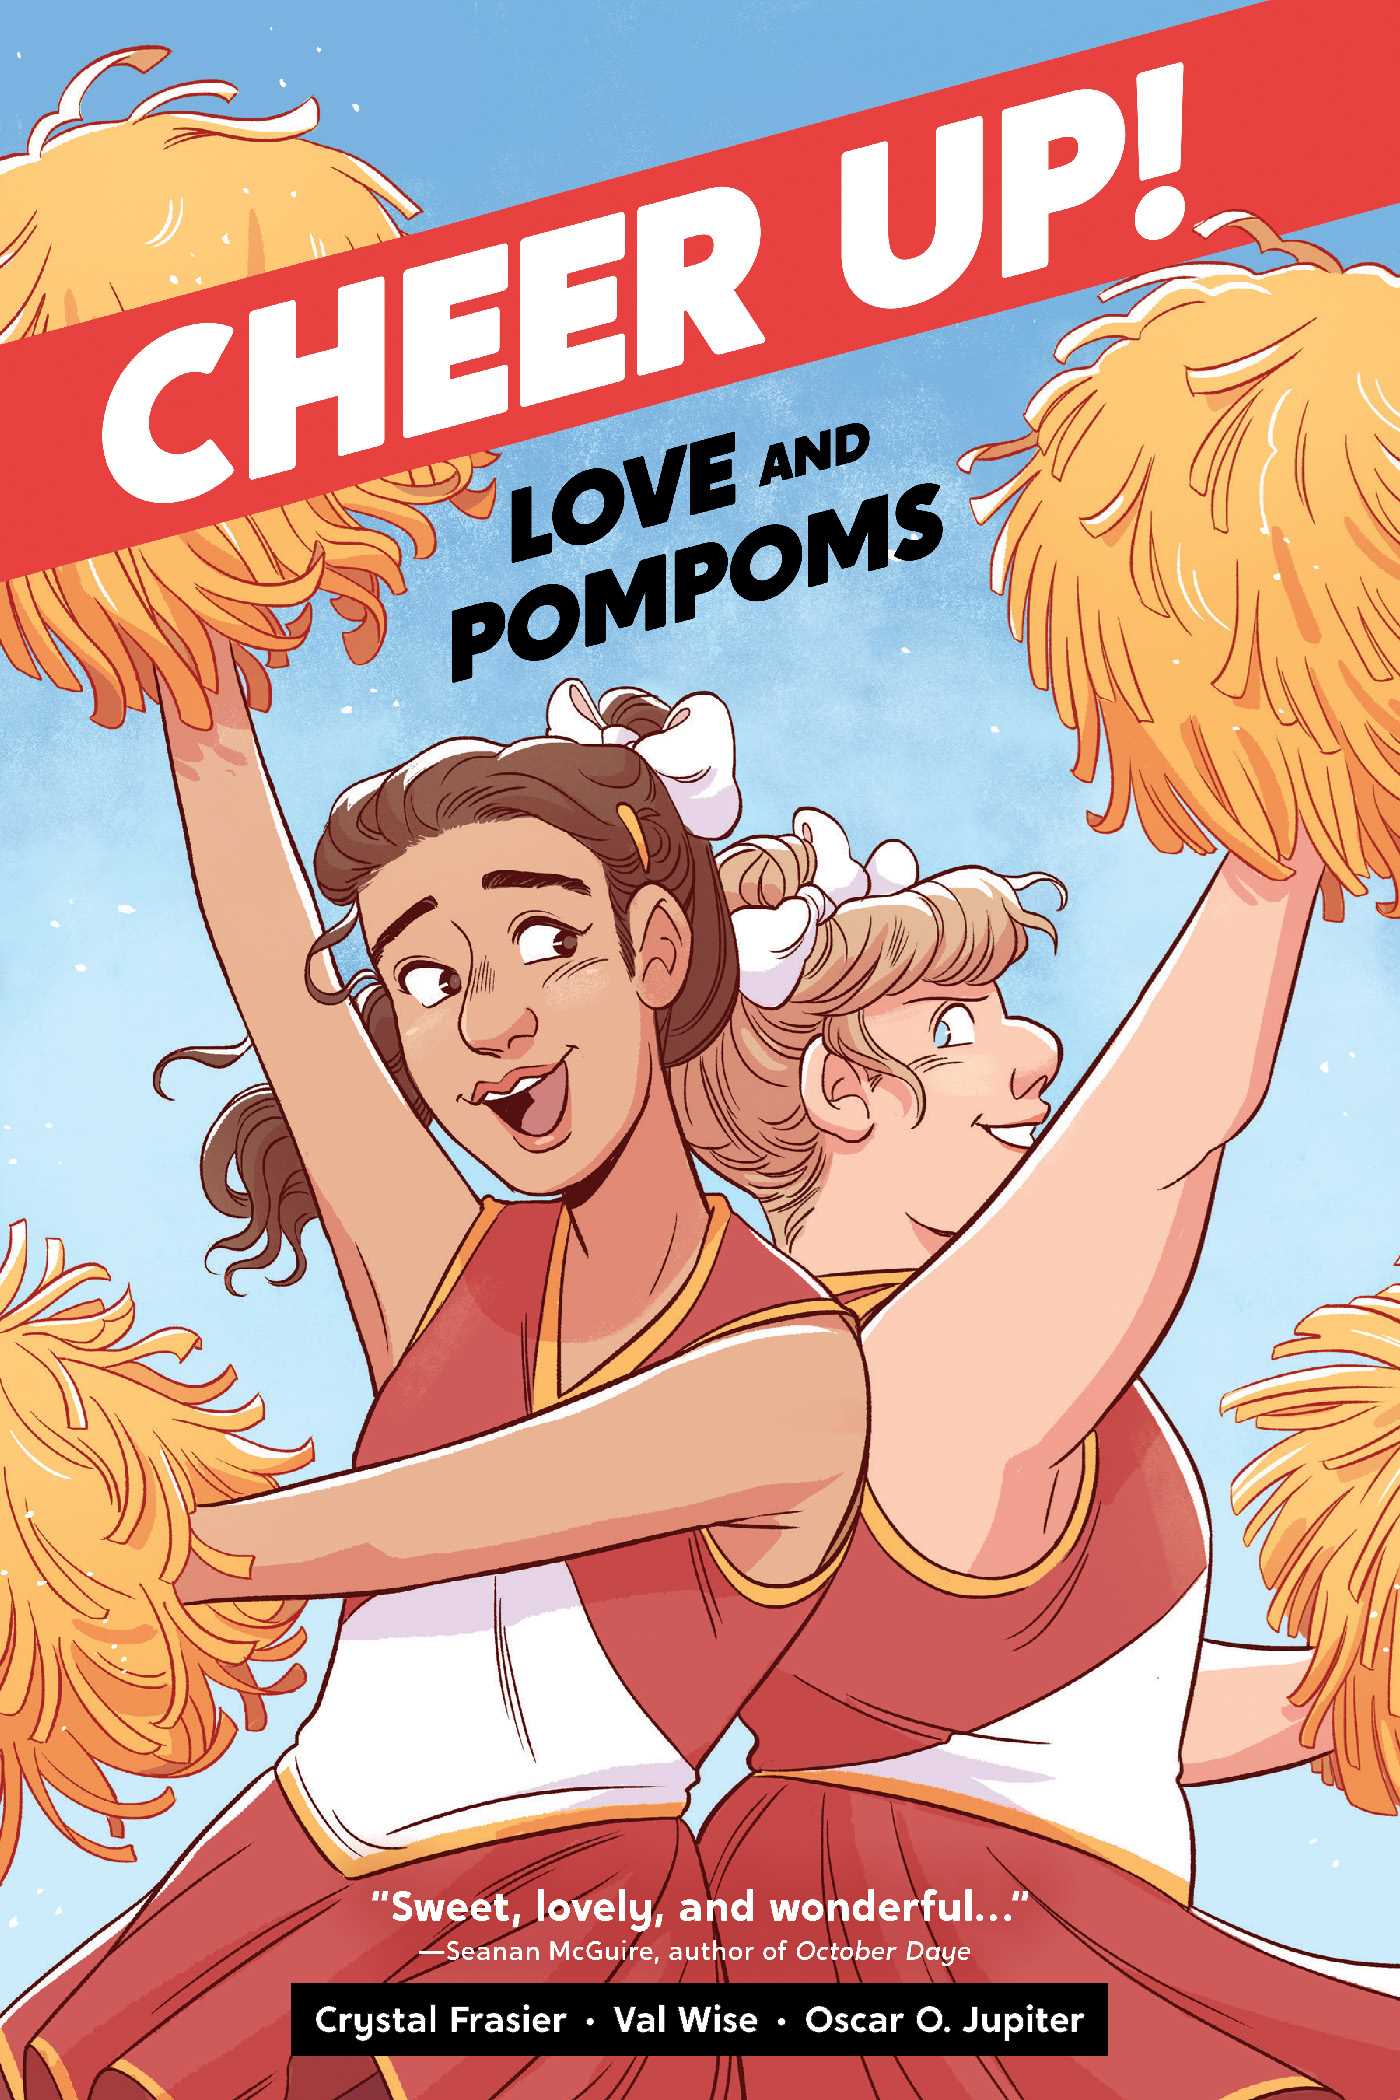 Cheer up! : Love and pompoms book cover